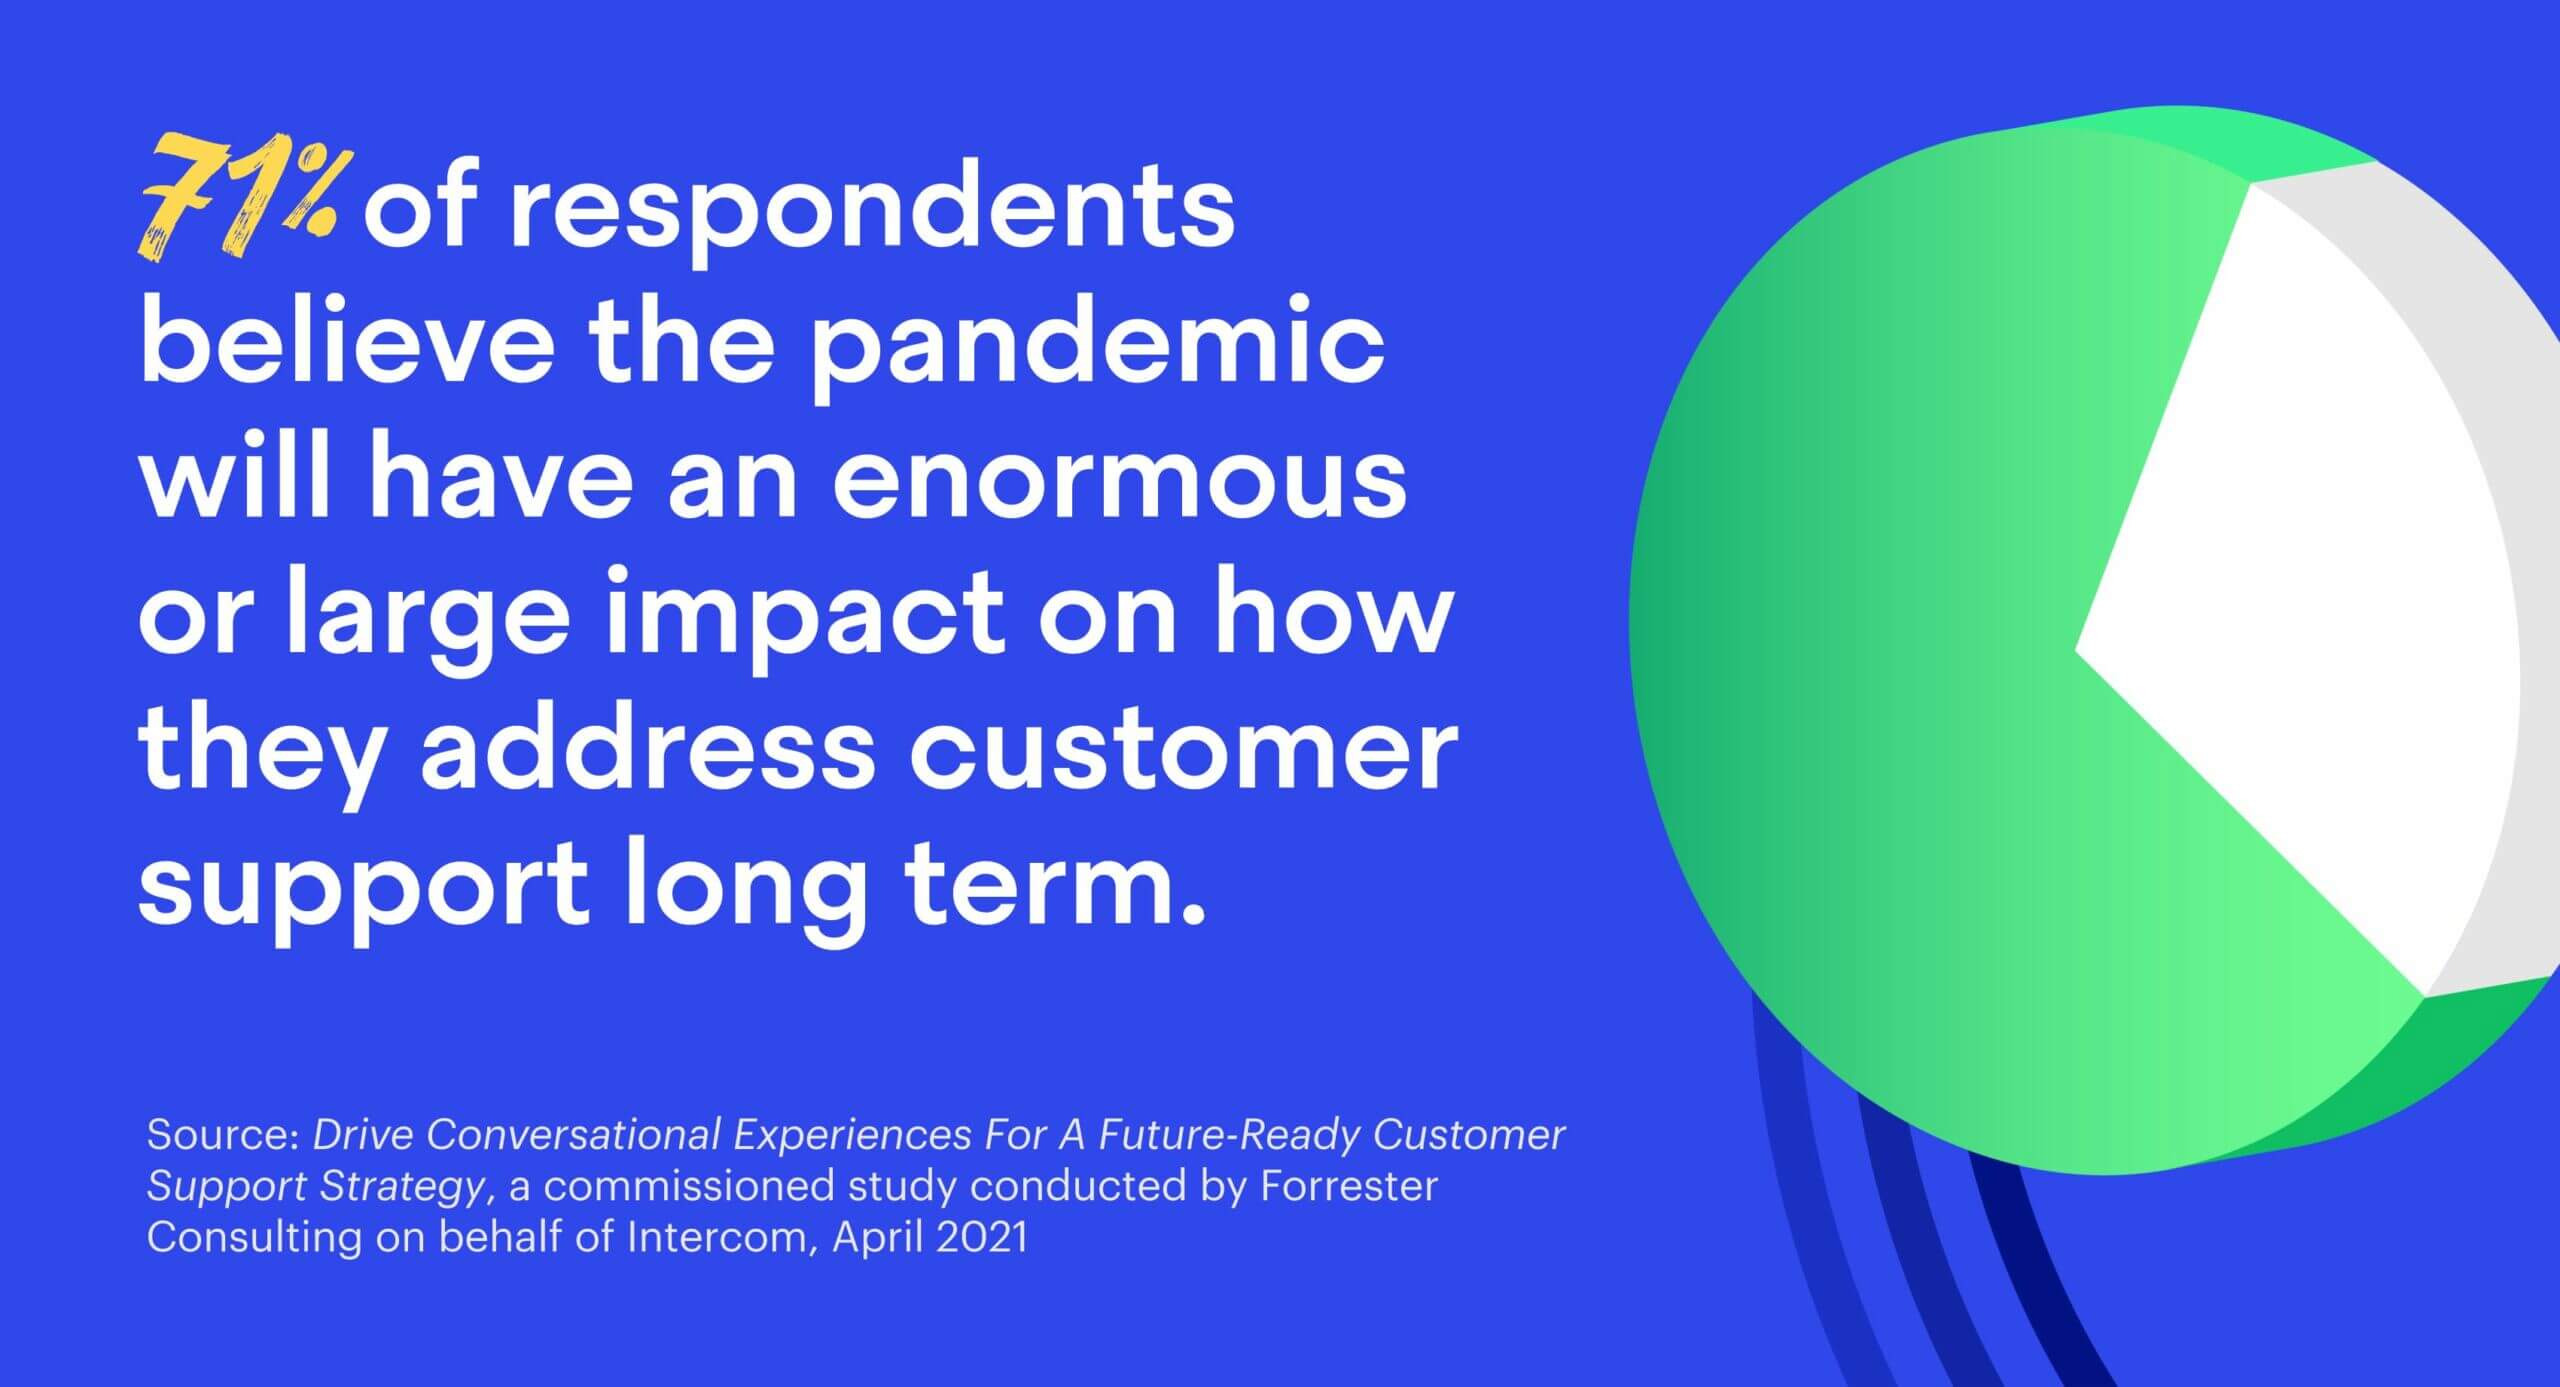 71% of respondents believe the pandemic will have an enormous or large impact